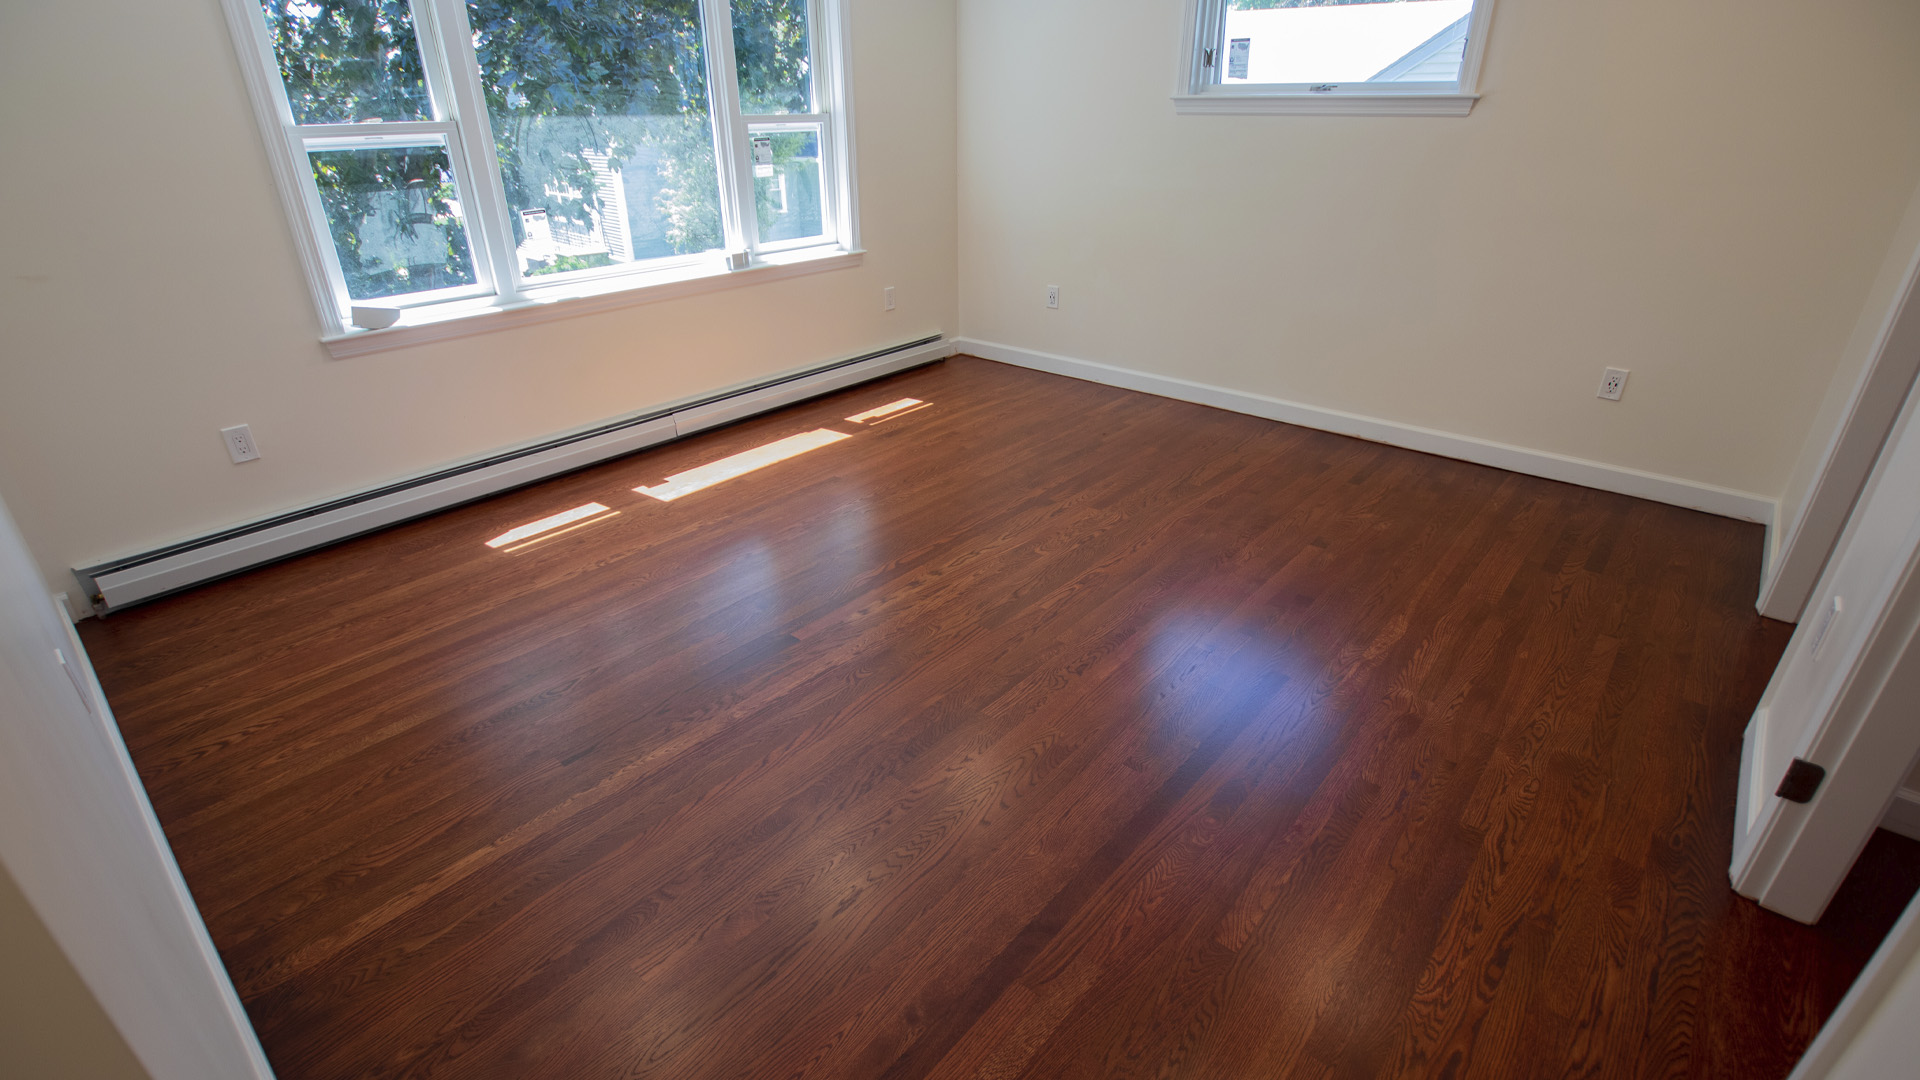 Weles Wood Floor Services in Belmont after